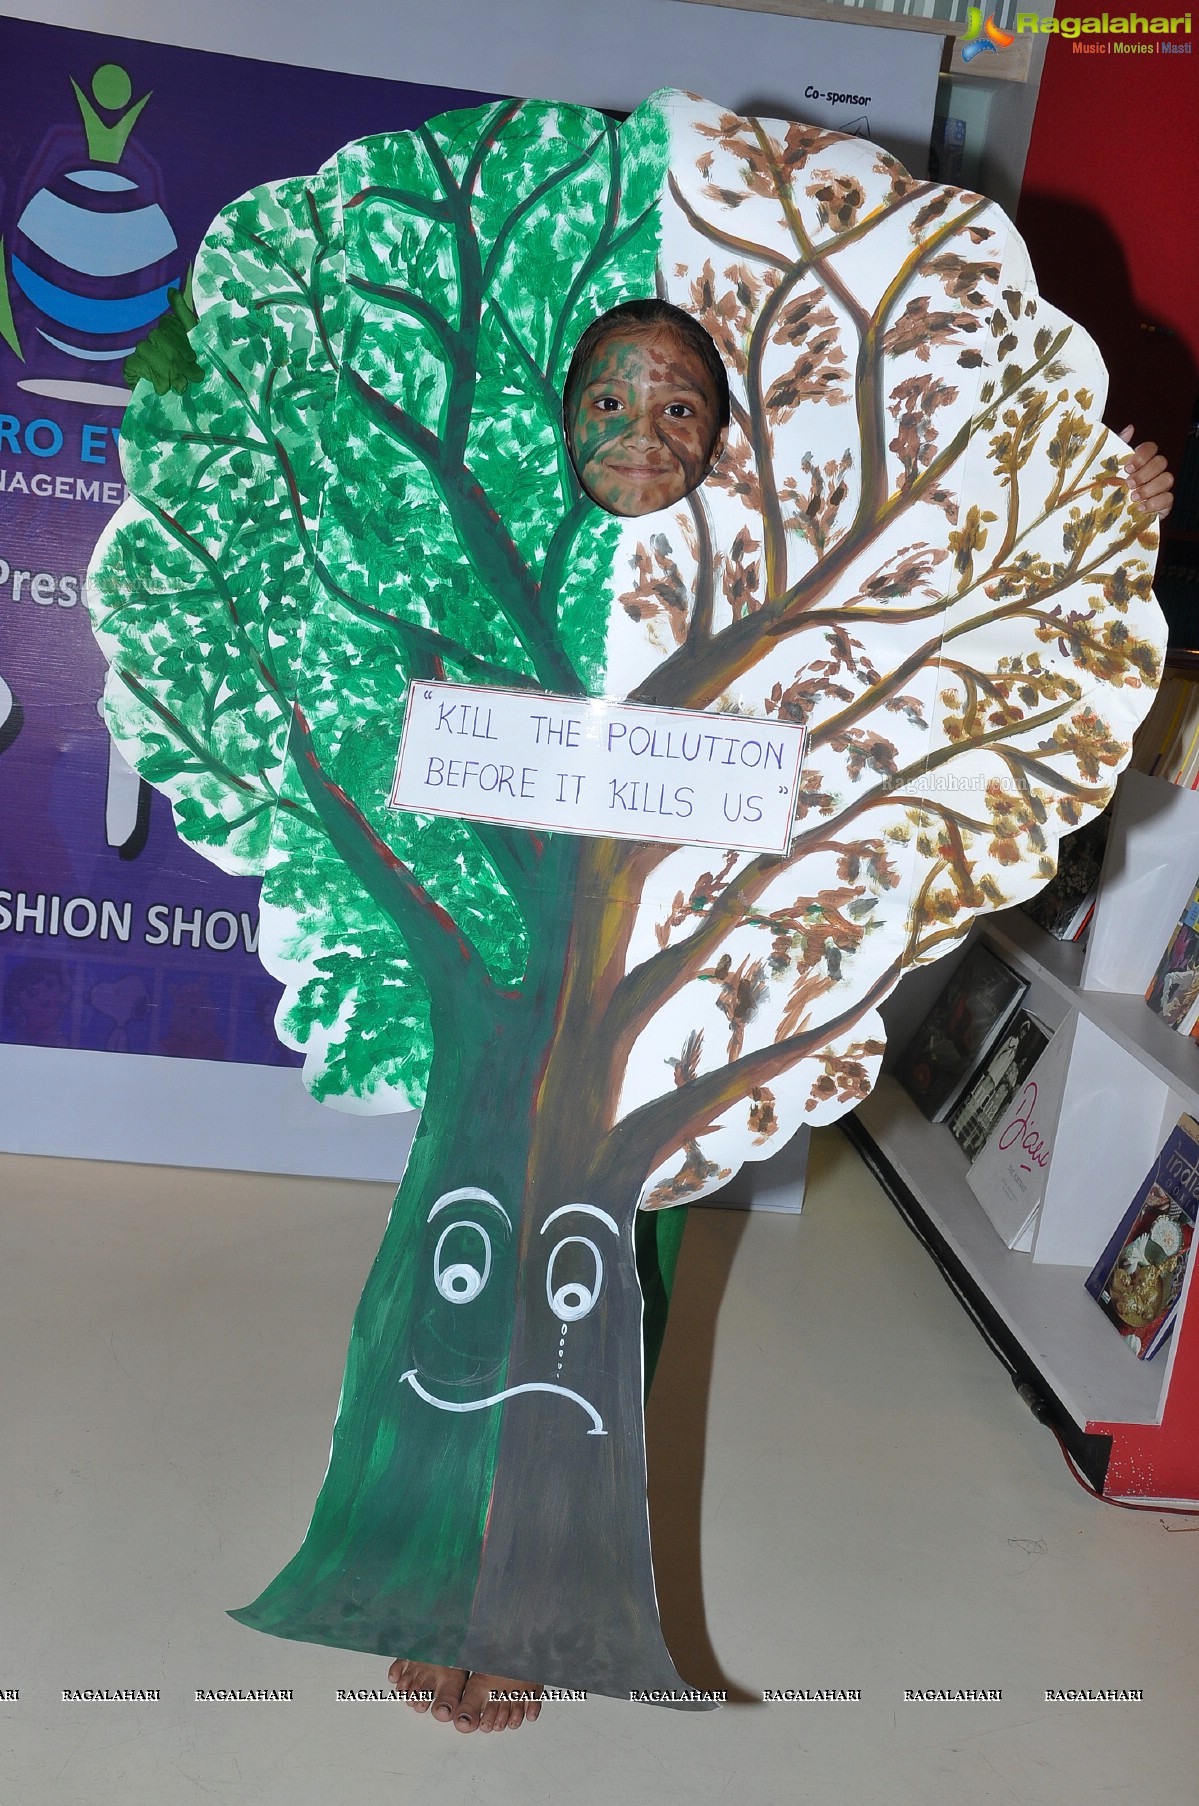 Oxford Bookstore's ‘Fancy Dress Competition and Fashion Show' for kids